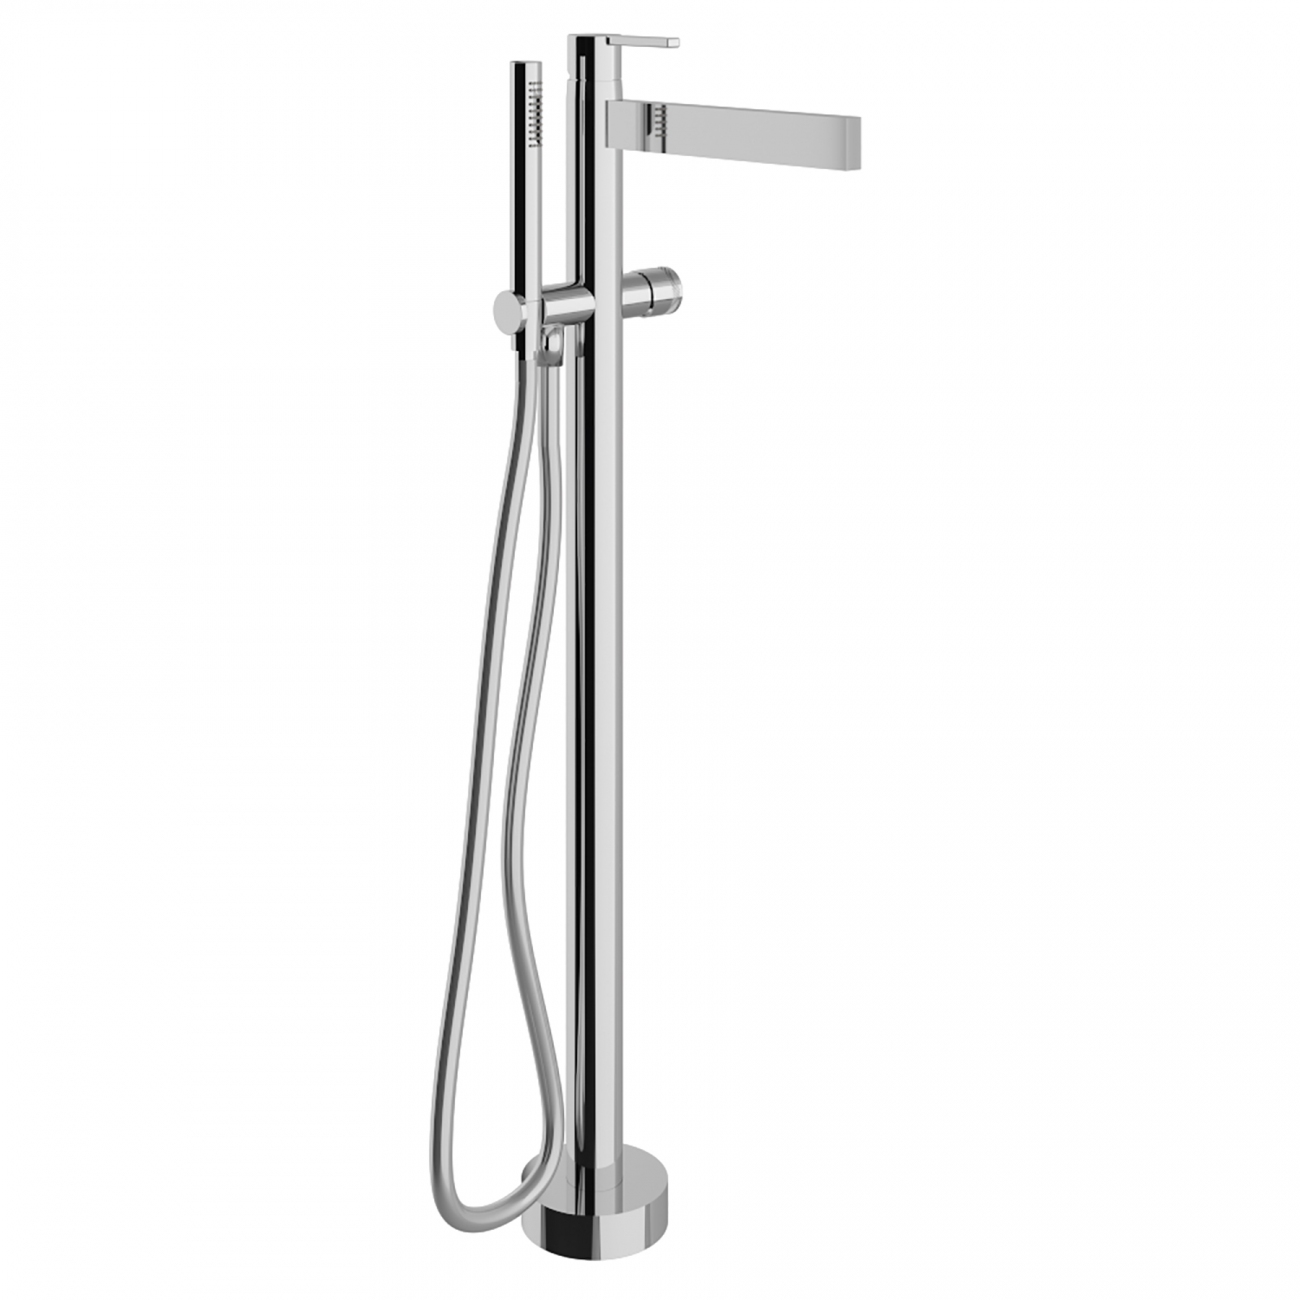 Treemme Time Out floor-mounted bathtub mixer